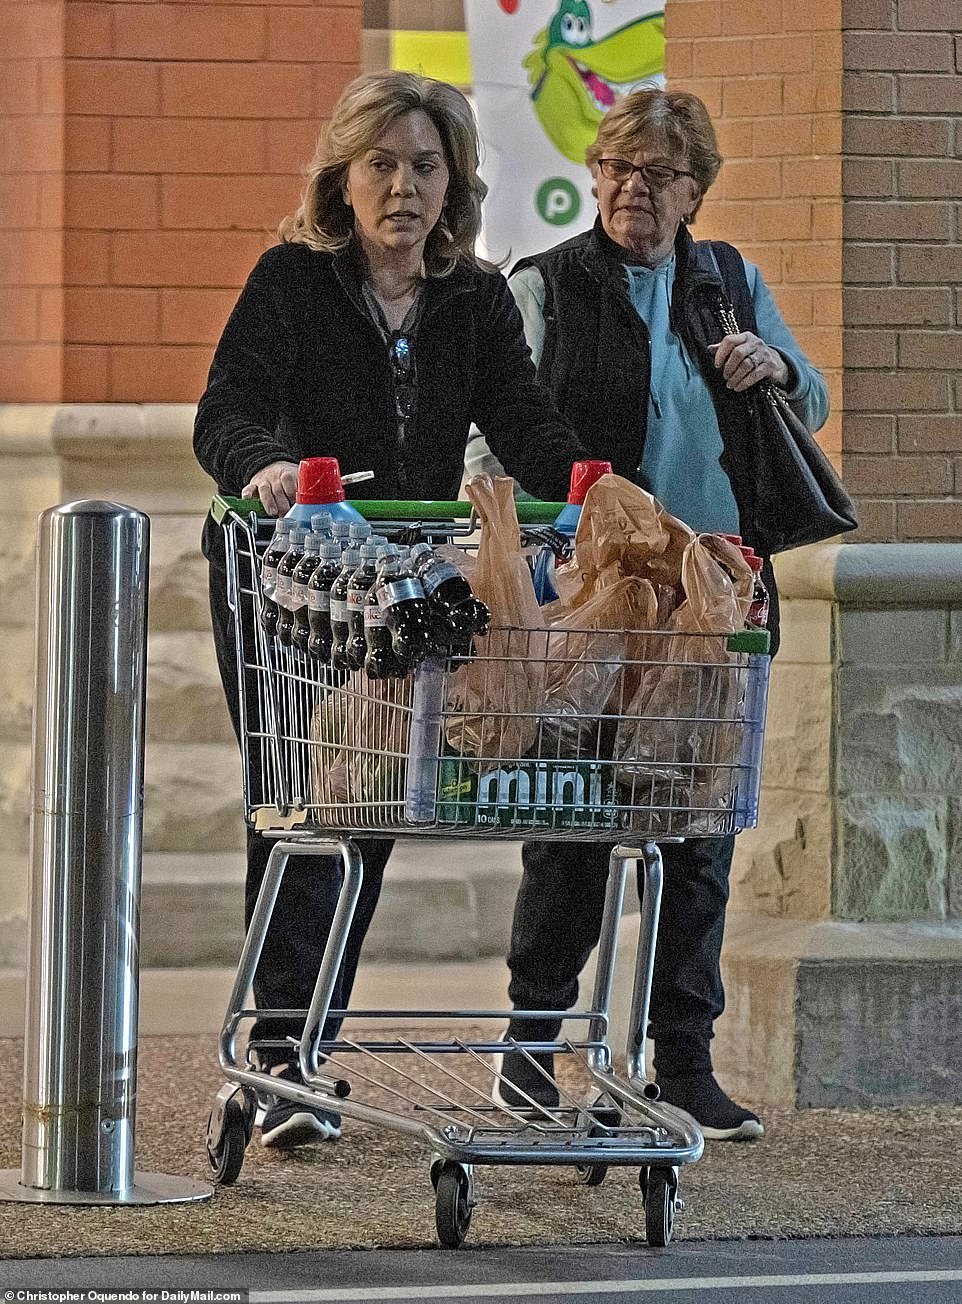 Julie's sheer amount of groceries seems odd considering she'll be away from her Brentwood, Tennessee, mansion for the next seven years.